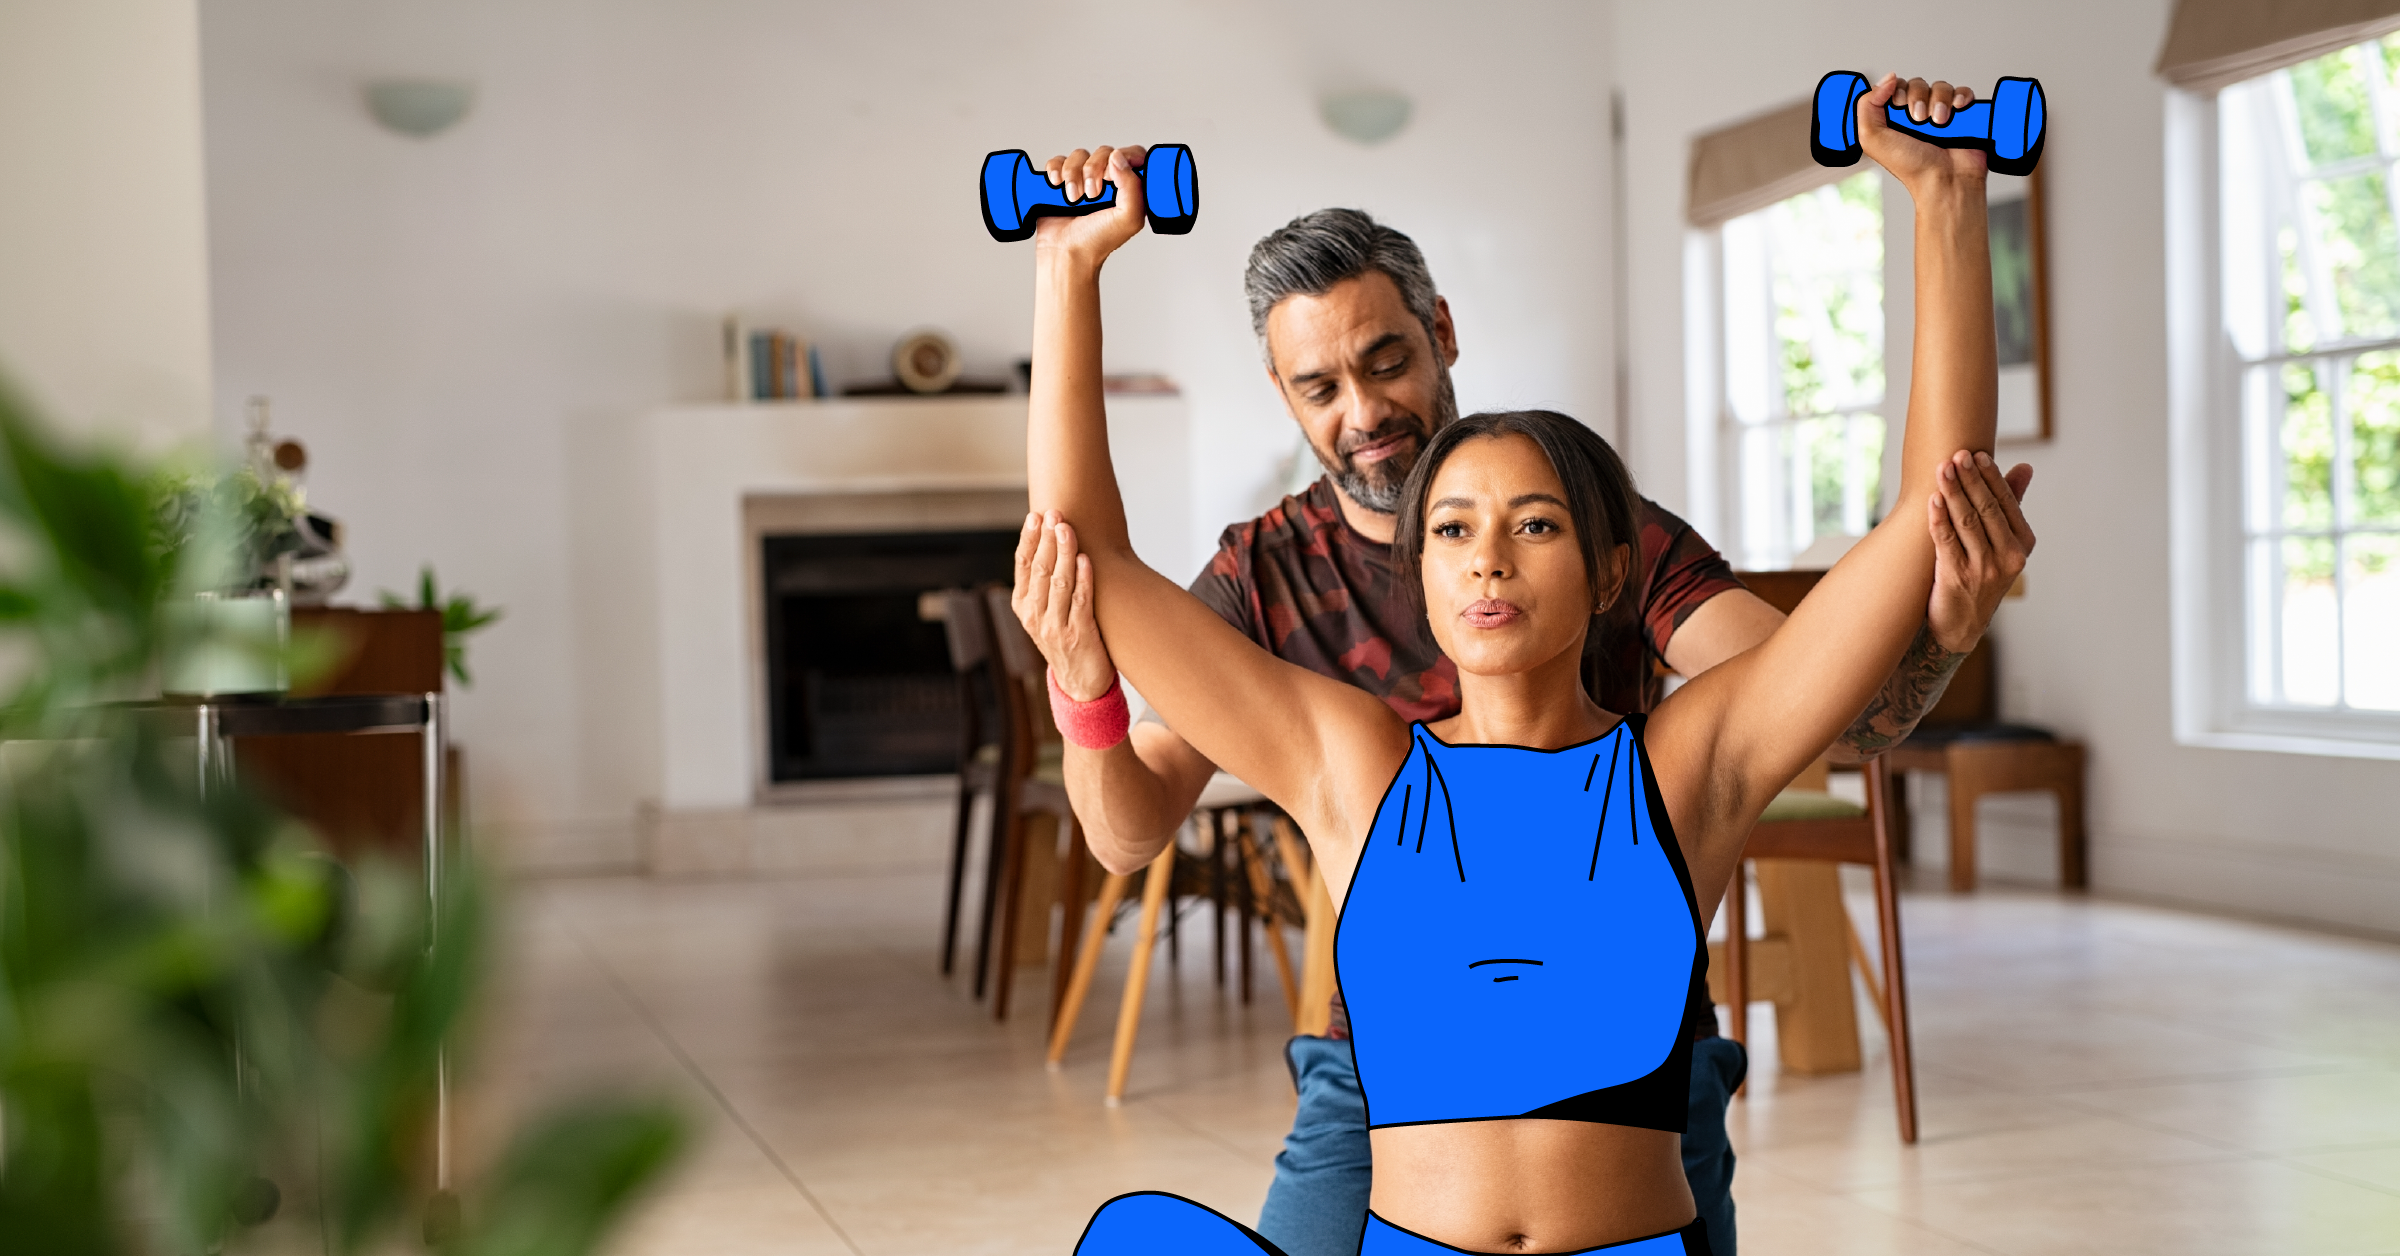 "Fitness trainer guiding a woman doing dumbbell exercises during at at-home session."